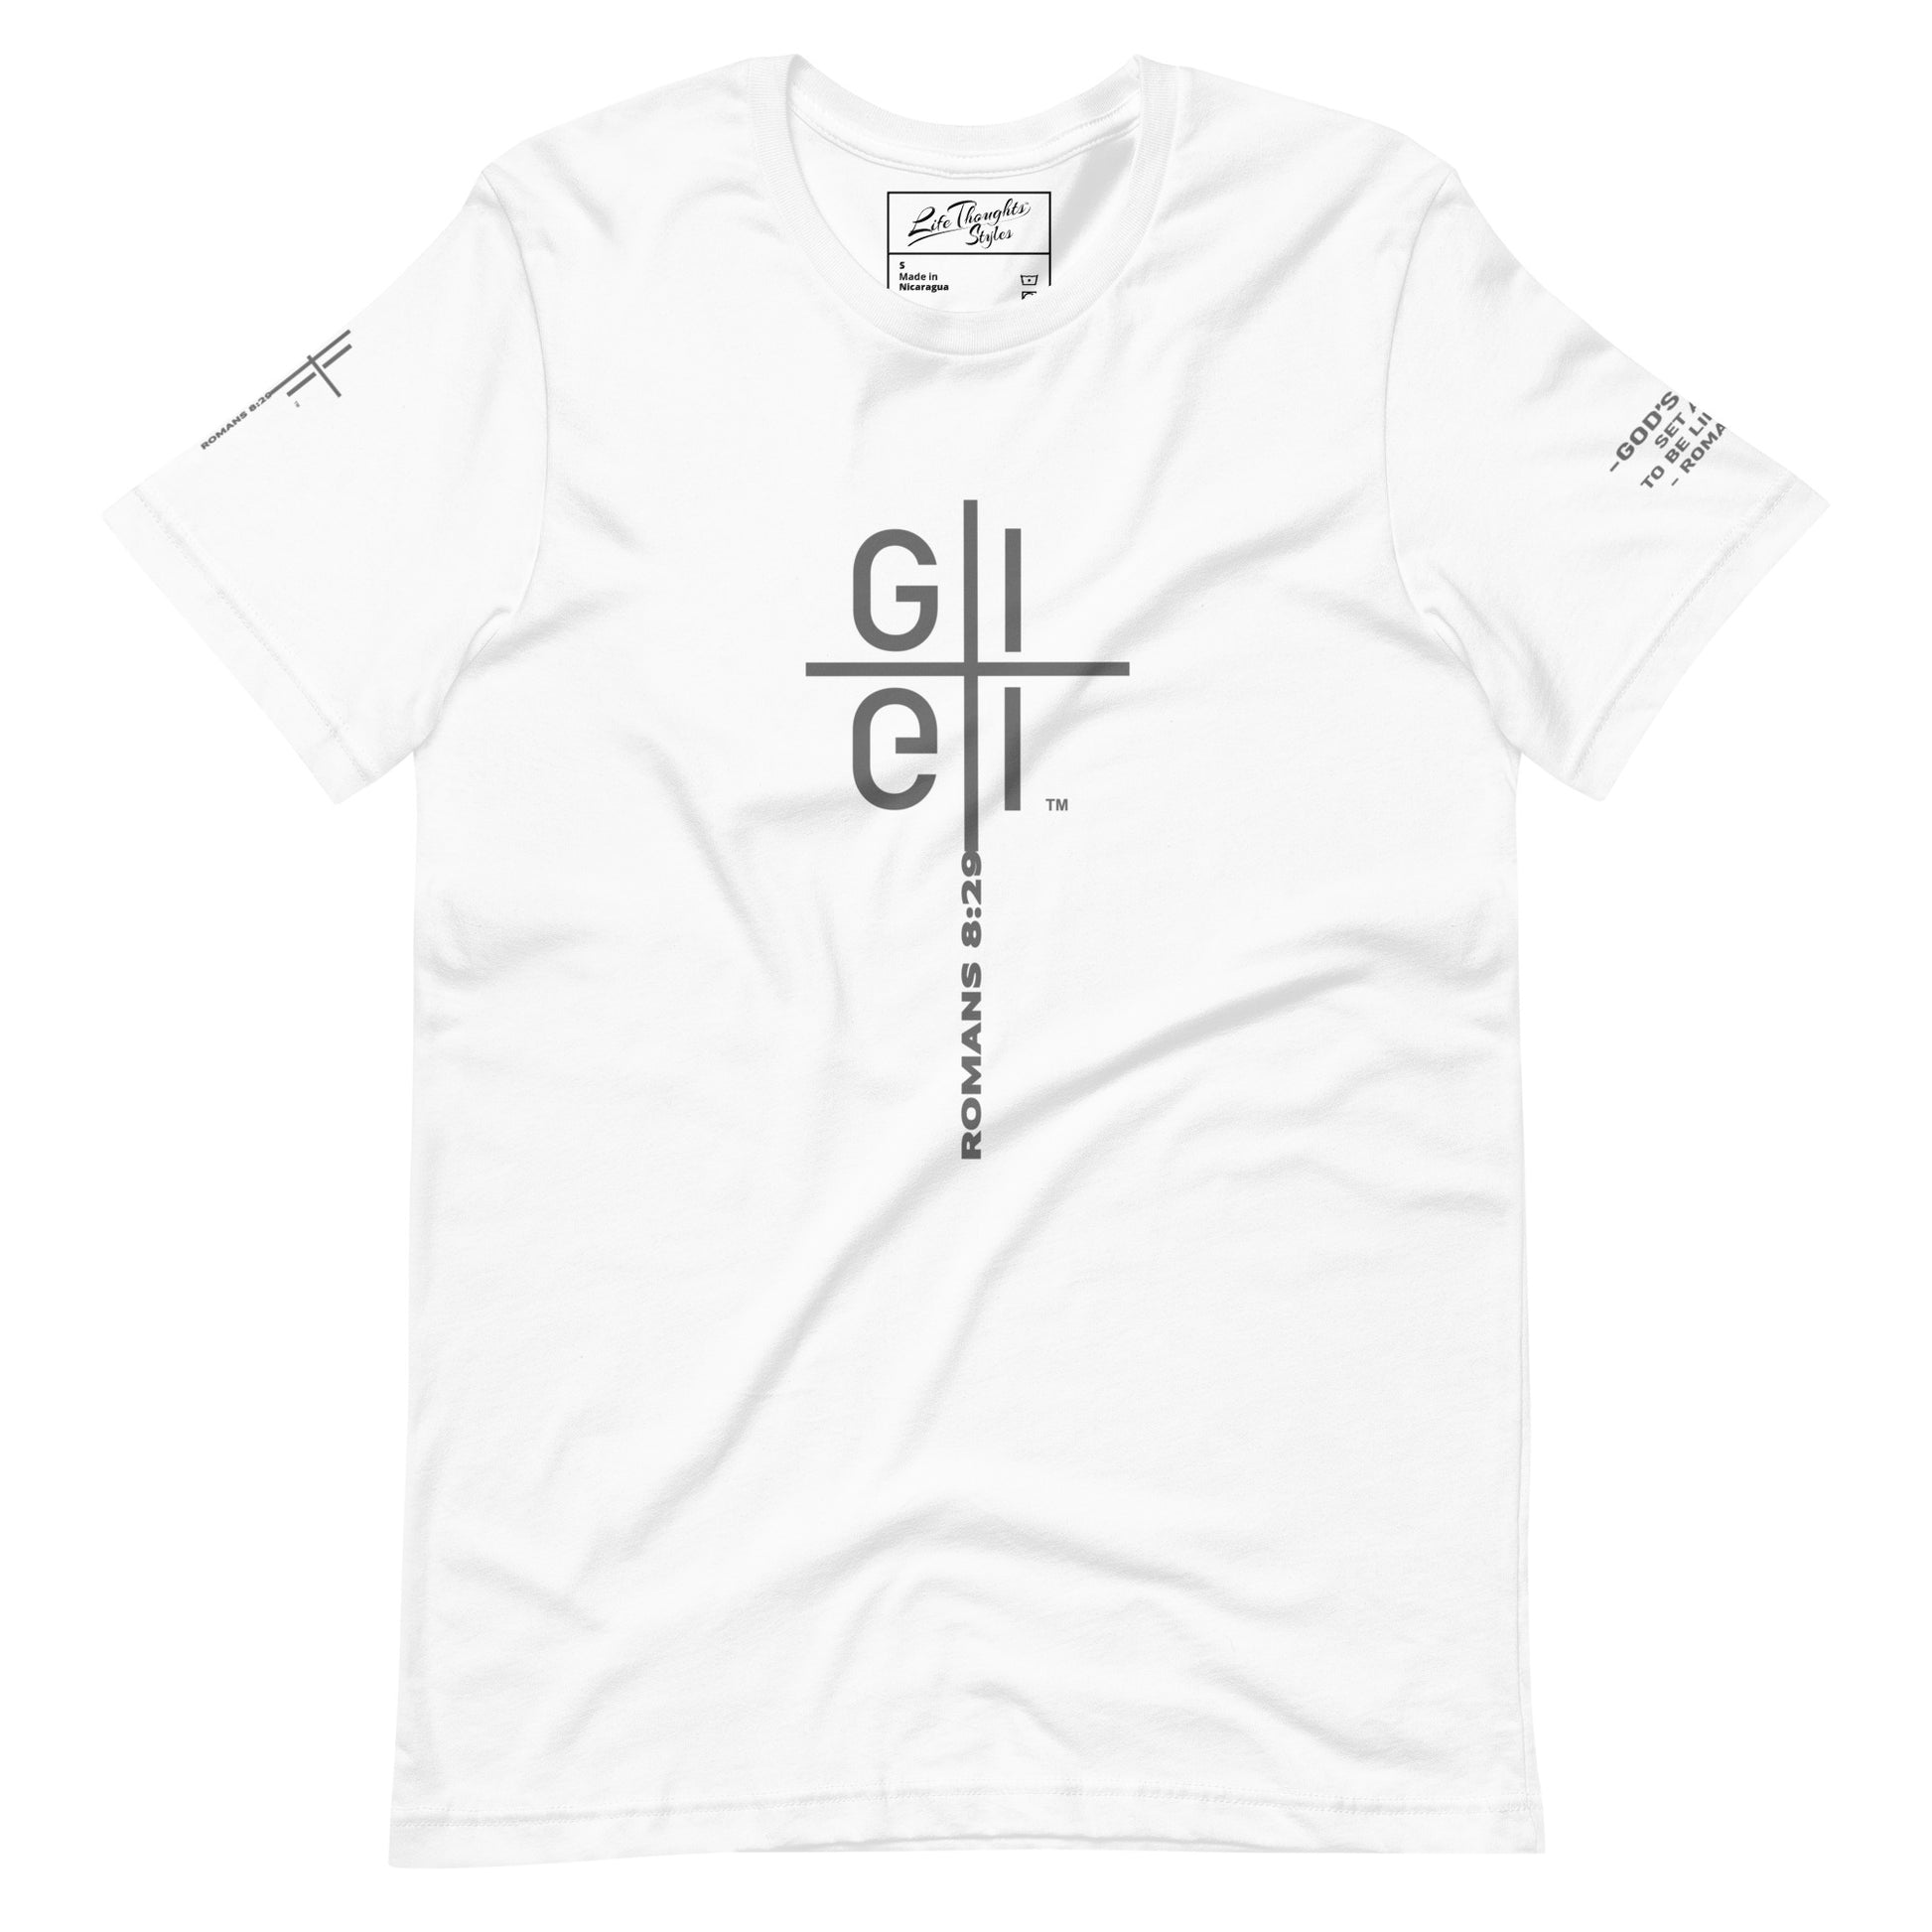 God's Image tee white with gray font